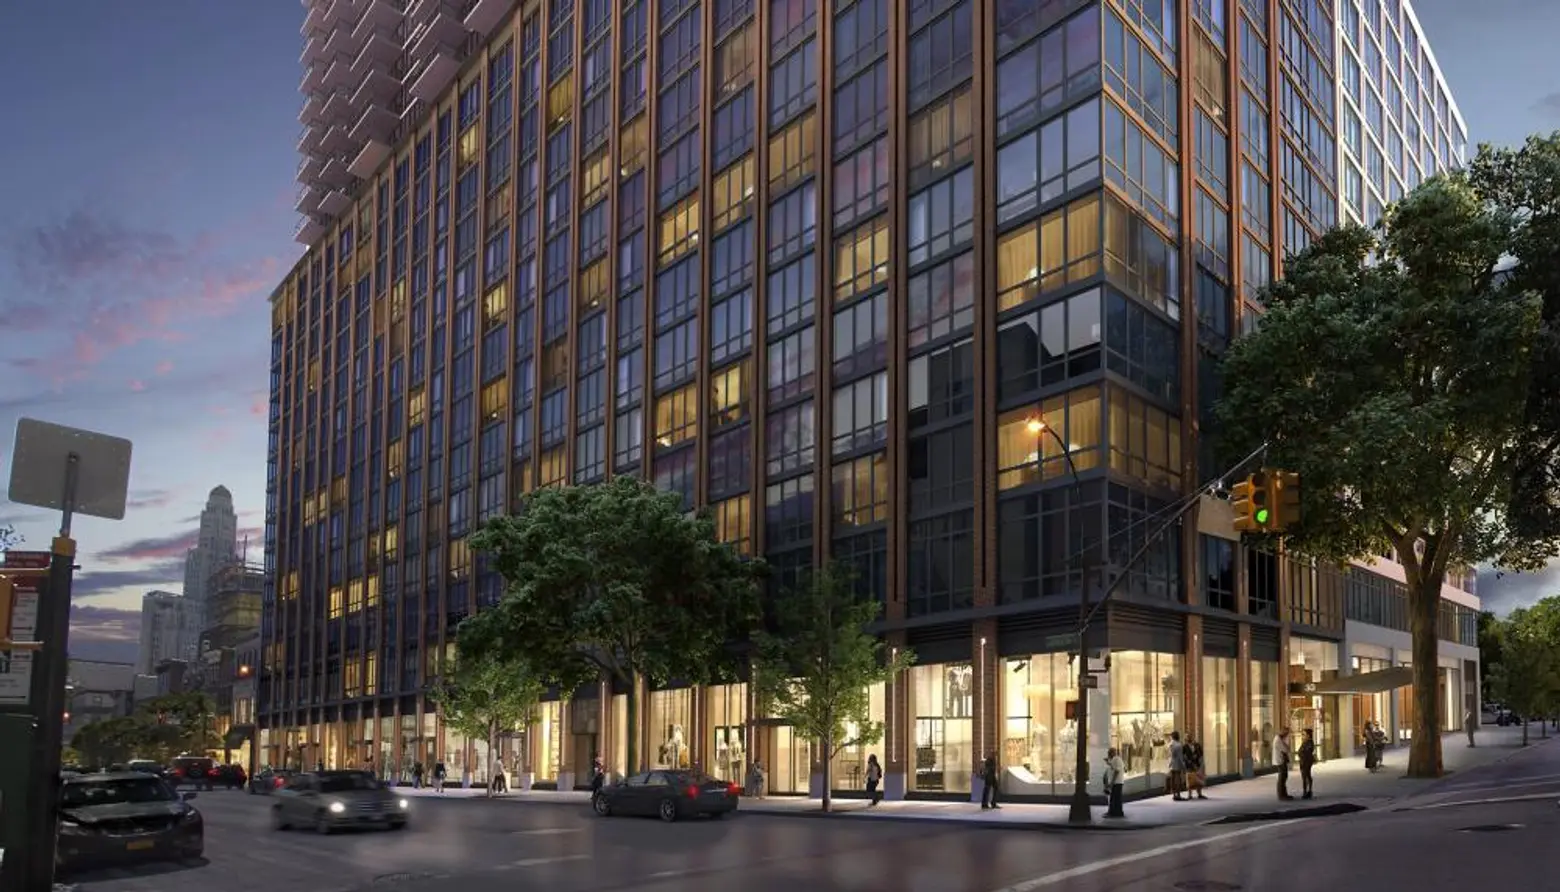 108 affordable apartments up for grabs in Downtown Brooklyn’s 33 Bond Street, from $613/month